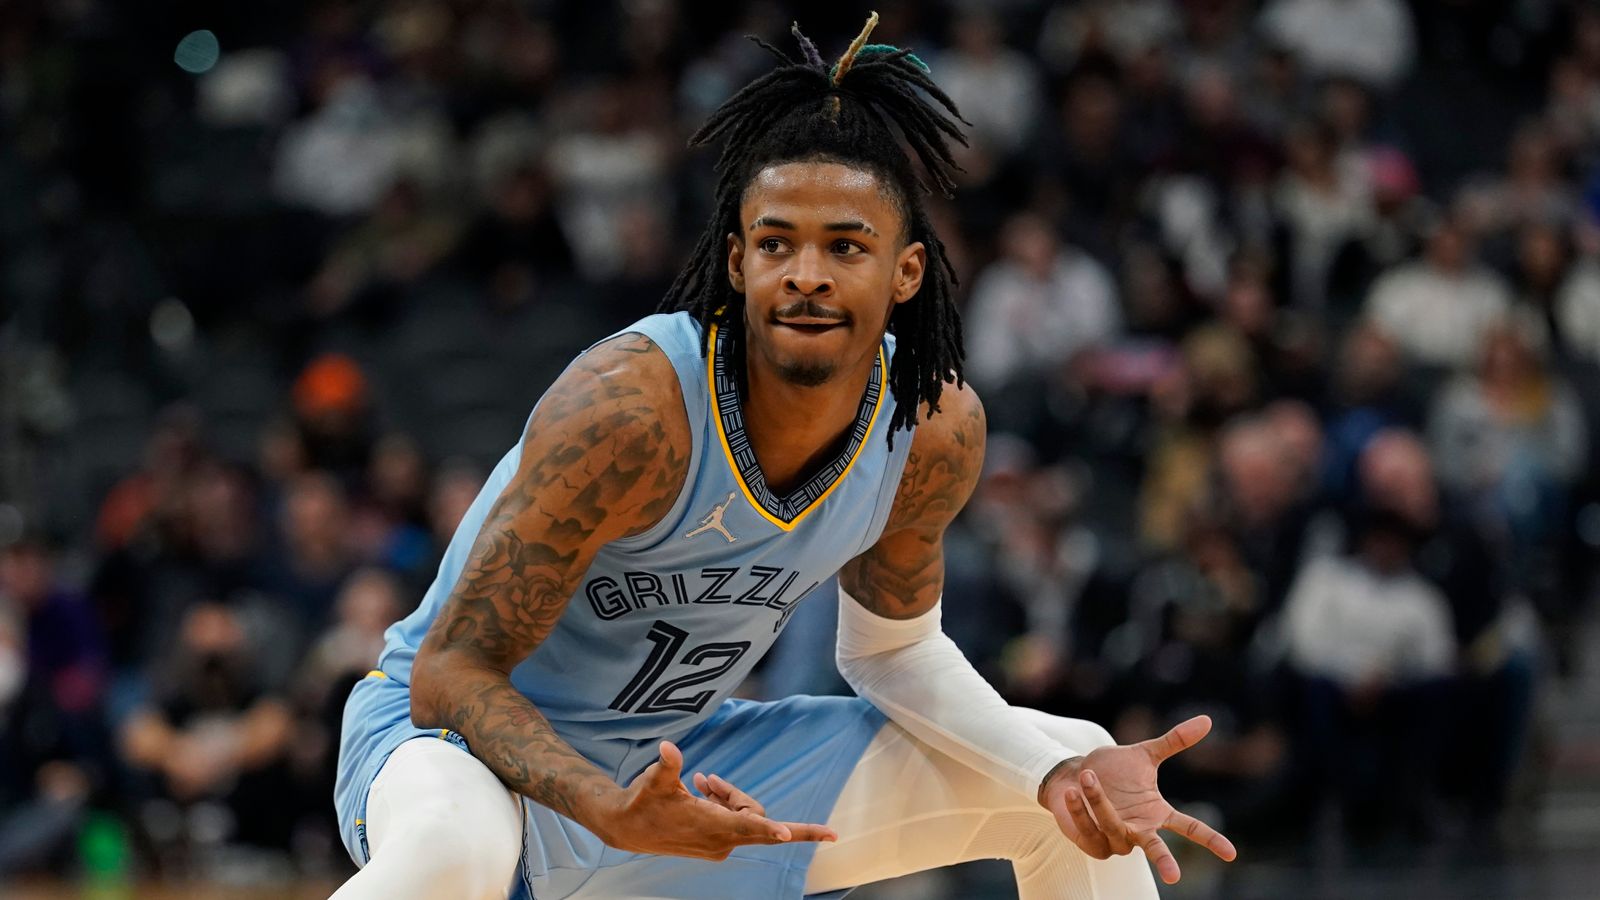 Ja Morant: How Far Can All Star Point Guard Take The Memphis Grizzlies?